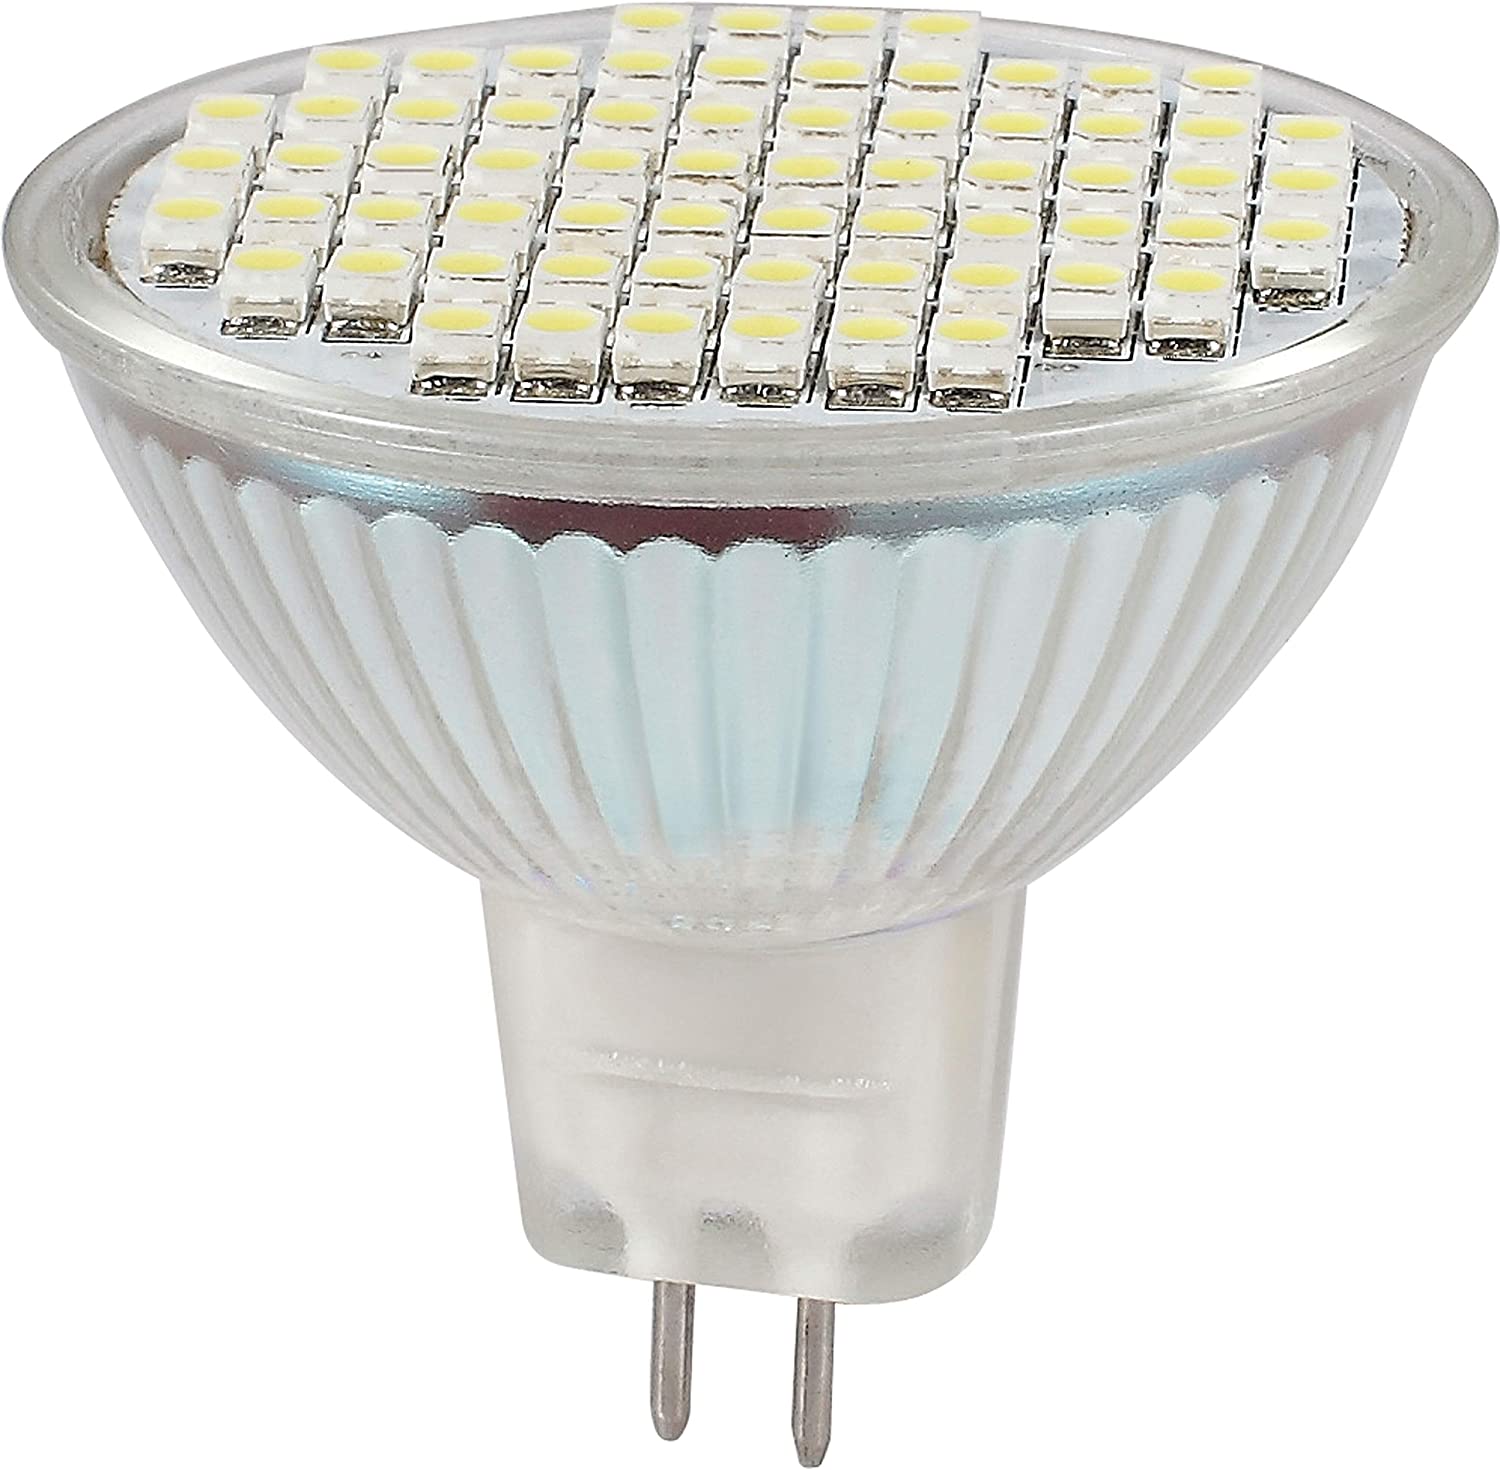 Green LongLife 3528104 MR16 Base Replacement LED Bulb